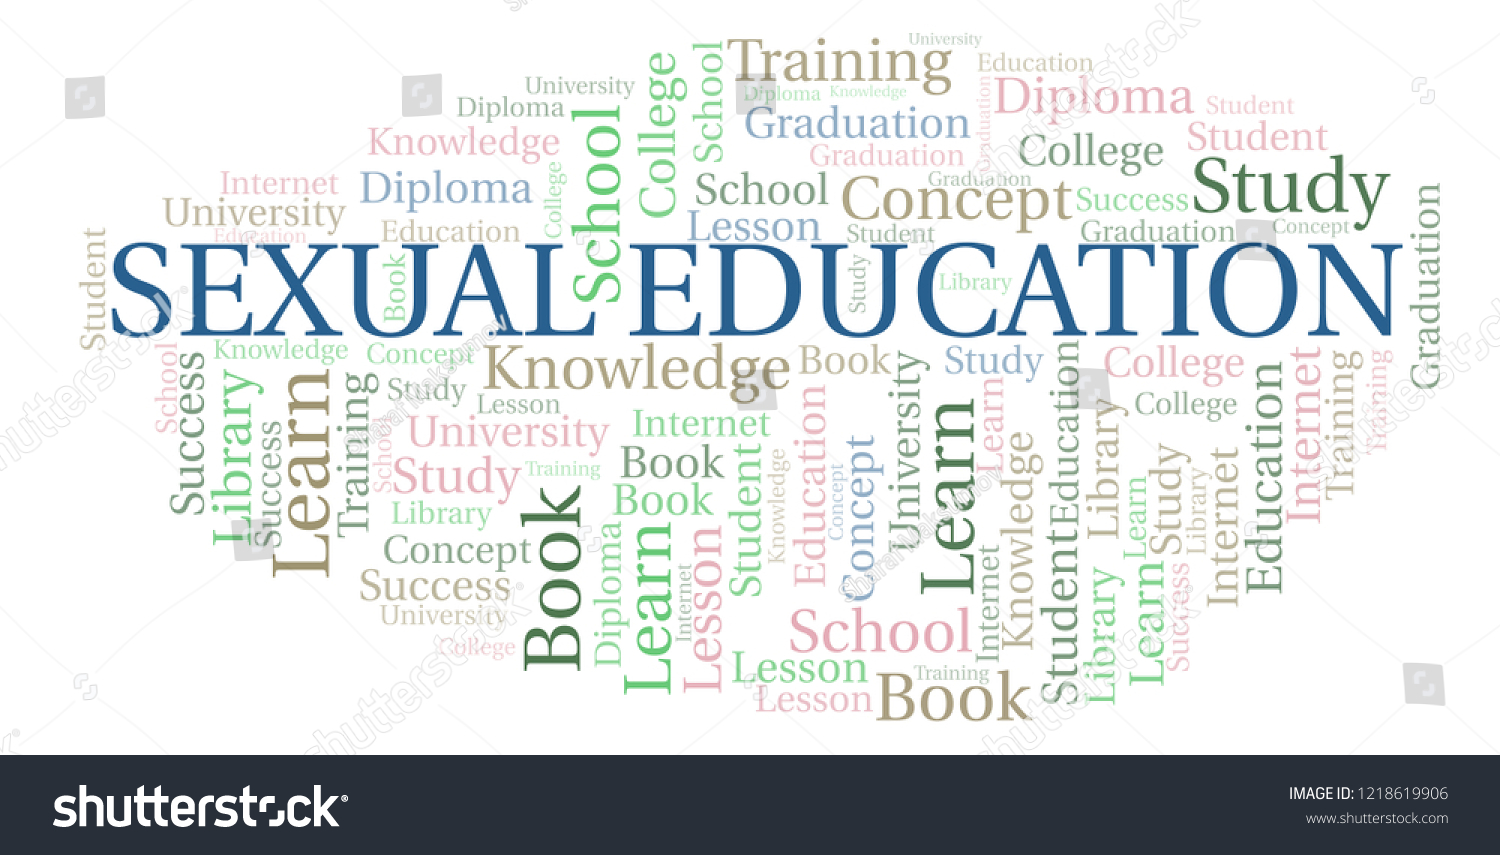 Sexual Education Word Cloud Stock Illustration 1218619906 Shutterstock 7637